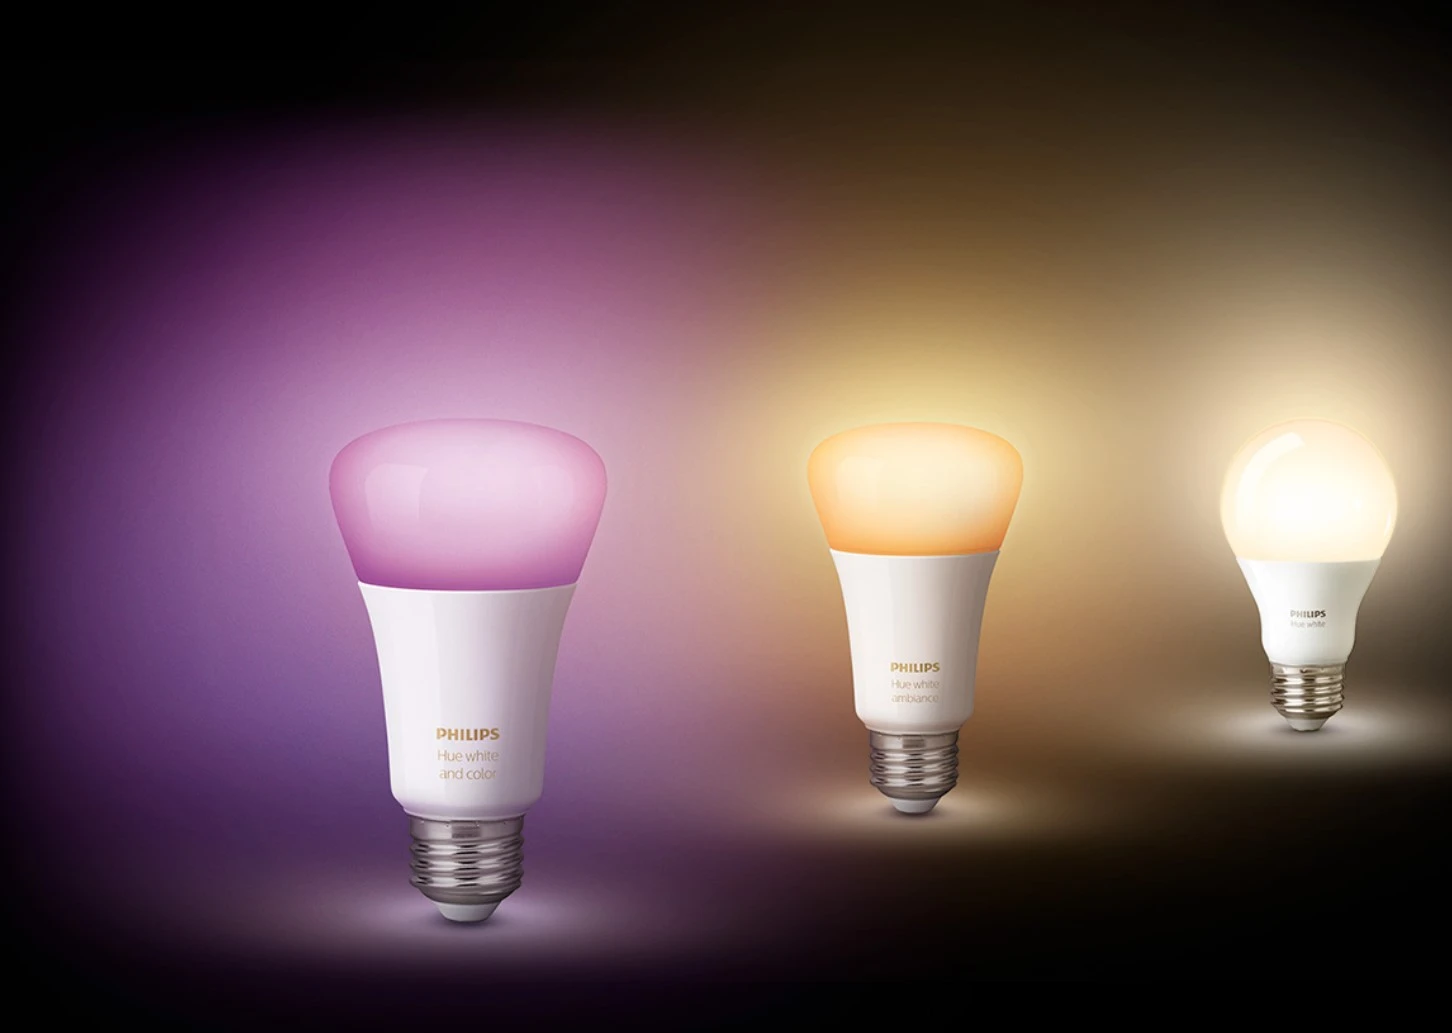 Understand the Difference Between Smart Bulbs & Smart Switches